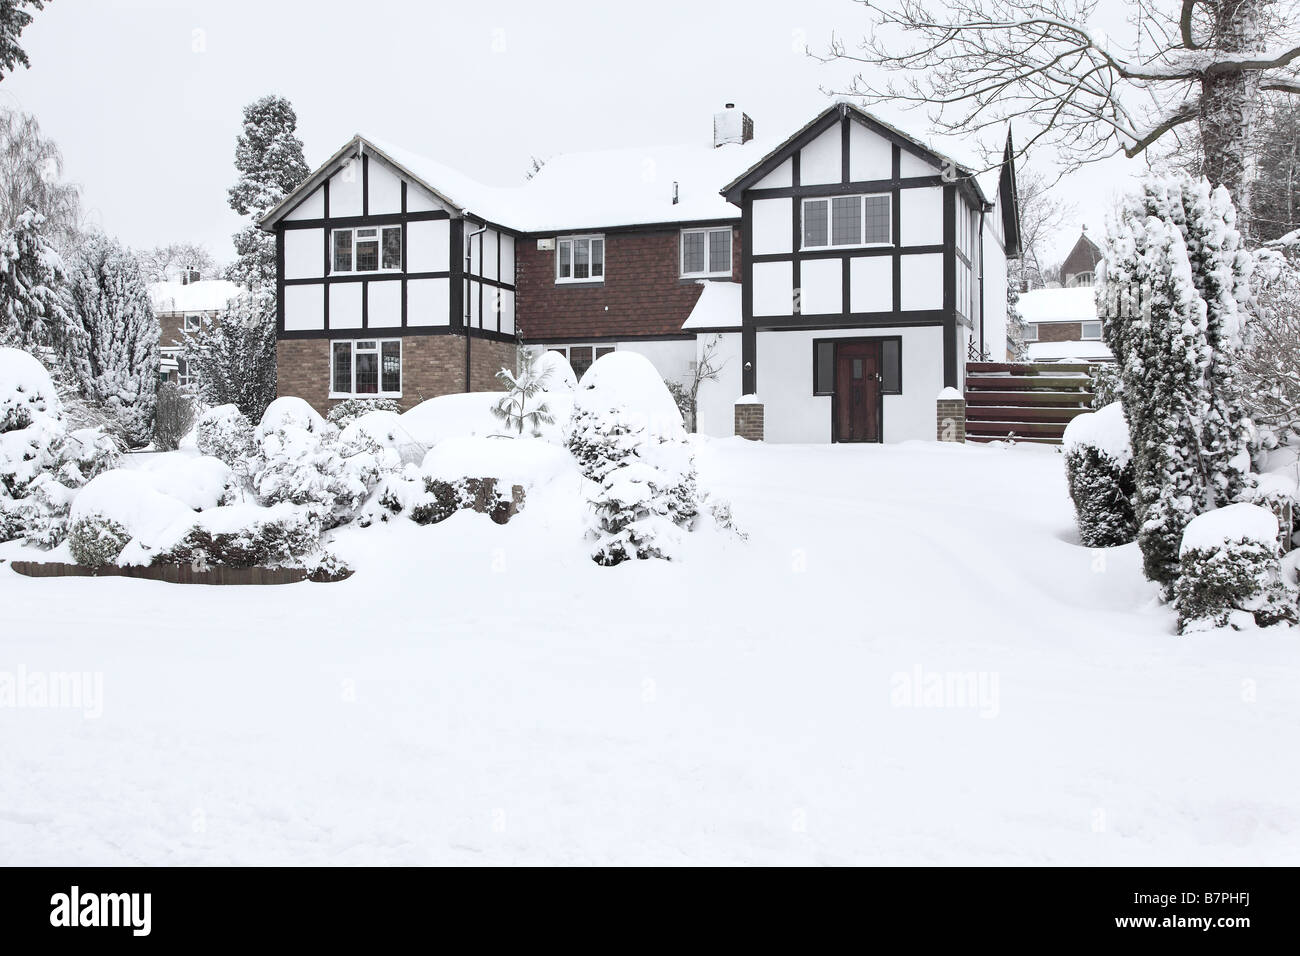 Front view of detached house in winter with a blanket of snow Stock Photo